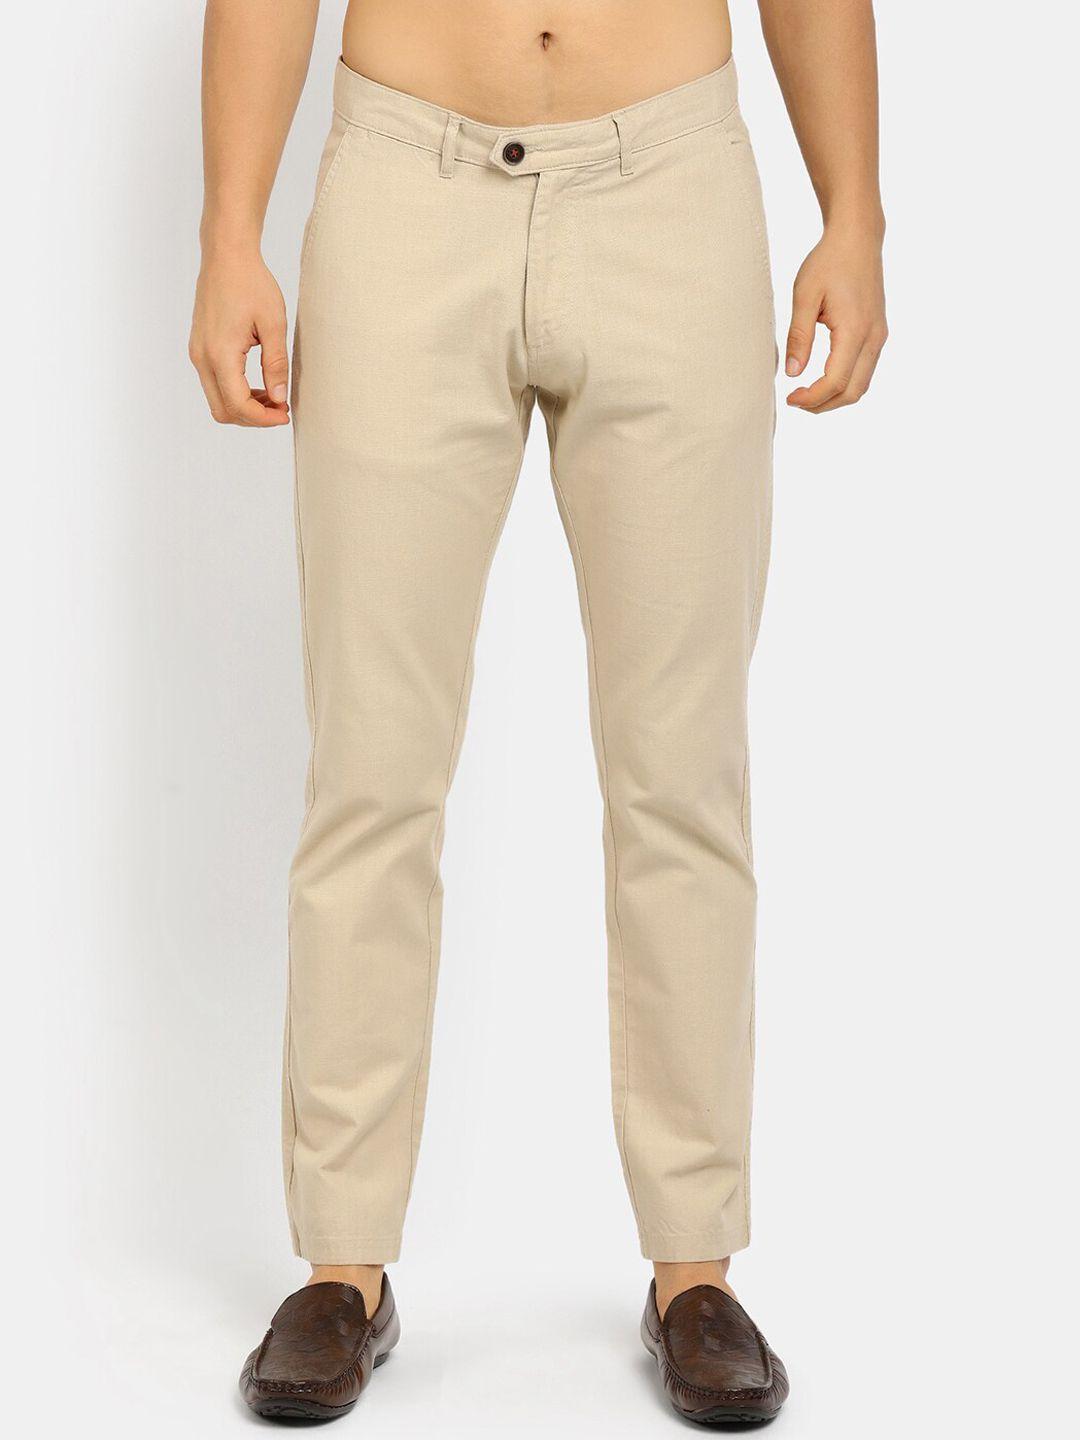 v-mart men beige classic cotton chinos trousers